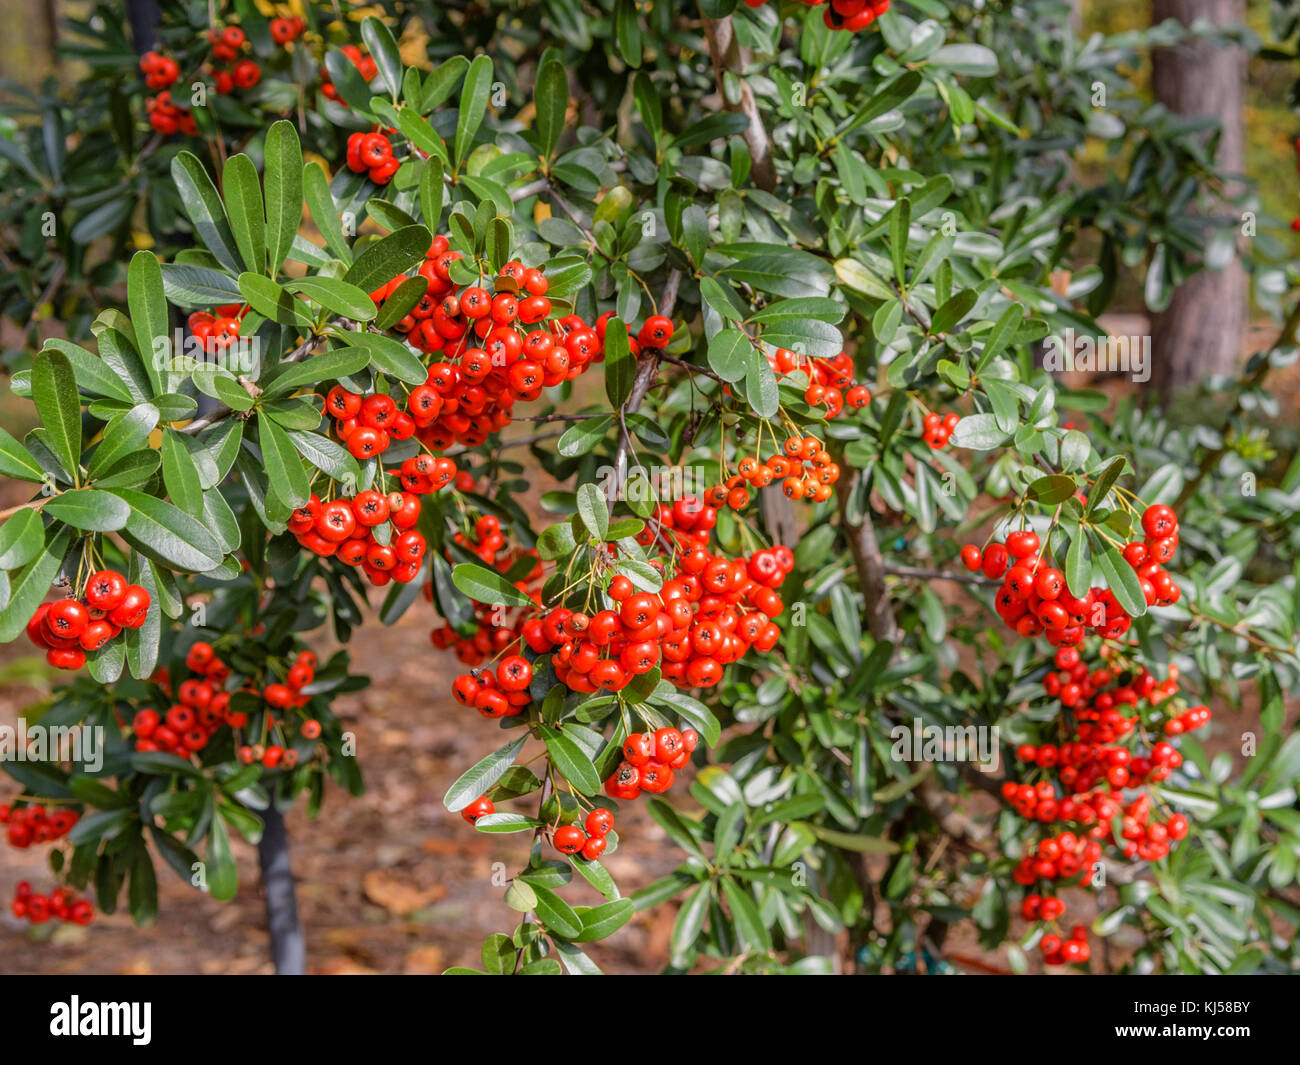 Pyracantha a genus of large, thorny evergreen shrubs in the family Rosaceae, with common names firethorn or pyracantha or victory pyracantha. Stock Photo